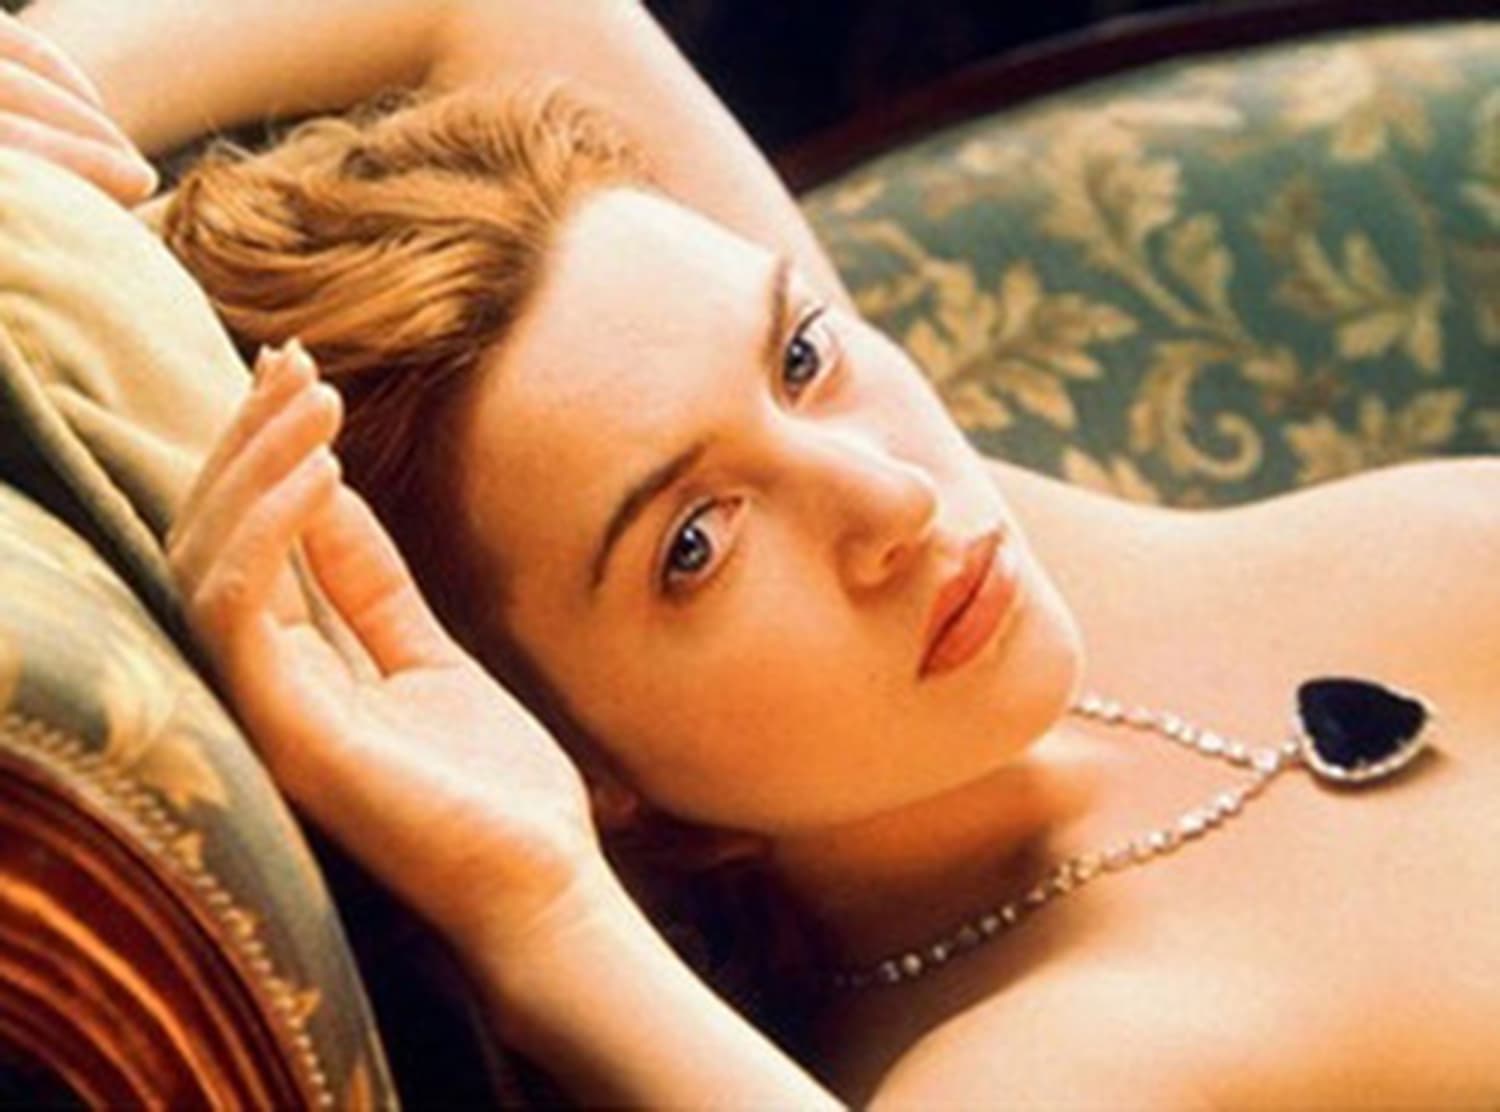 Kate Winslet's screen test for 'Titanic' is magic. But who plays Jack?